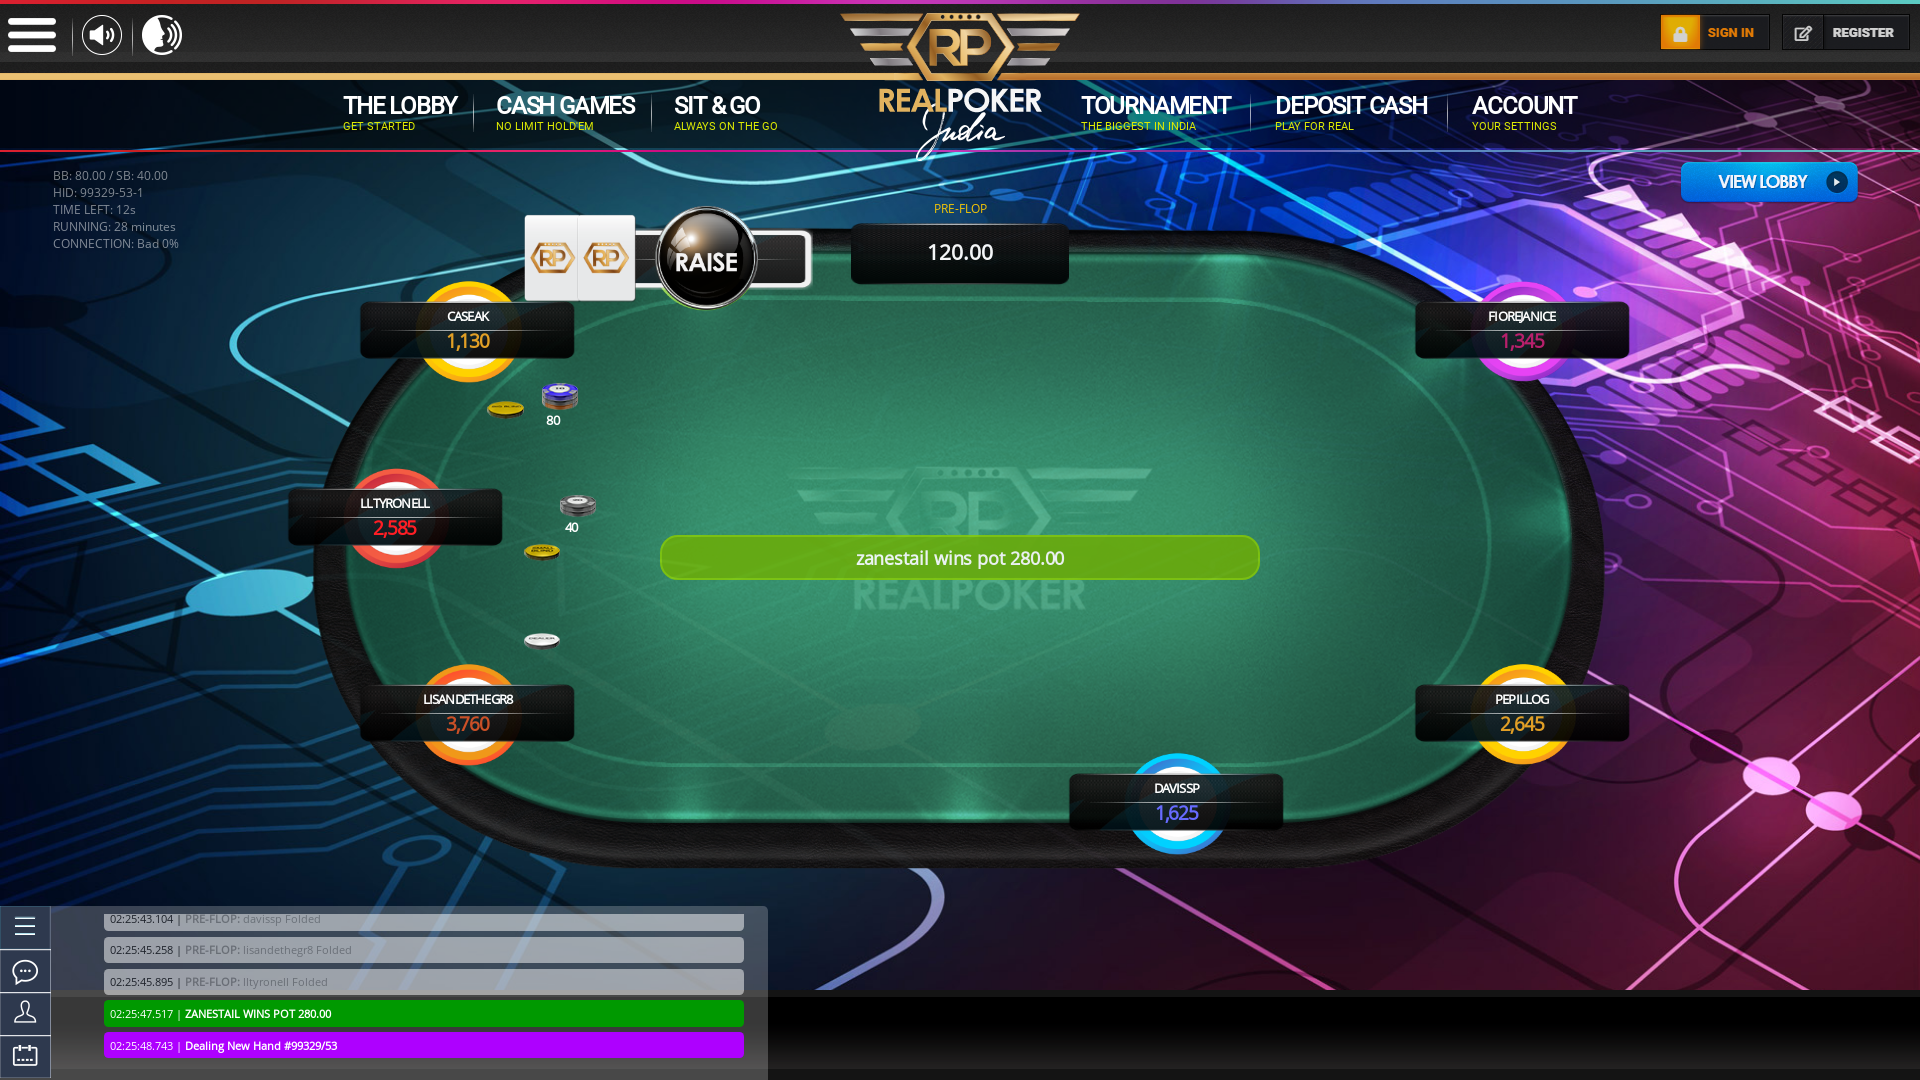 Kolkata real poker on a 10 player table in the 27th minute of the game